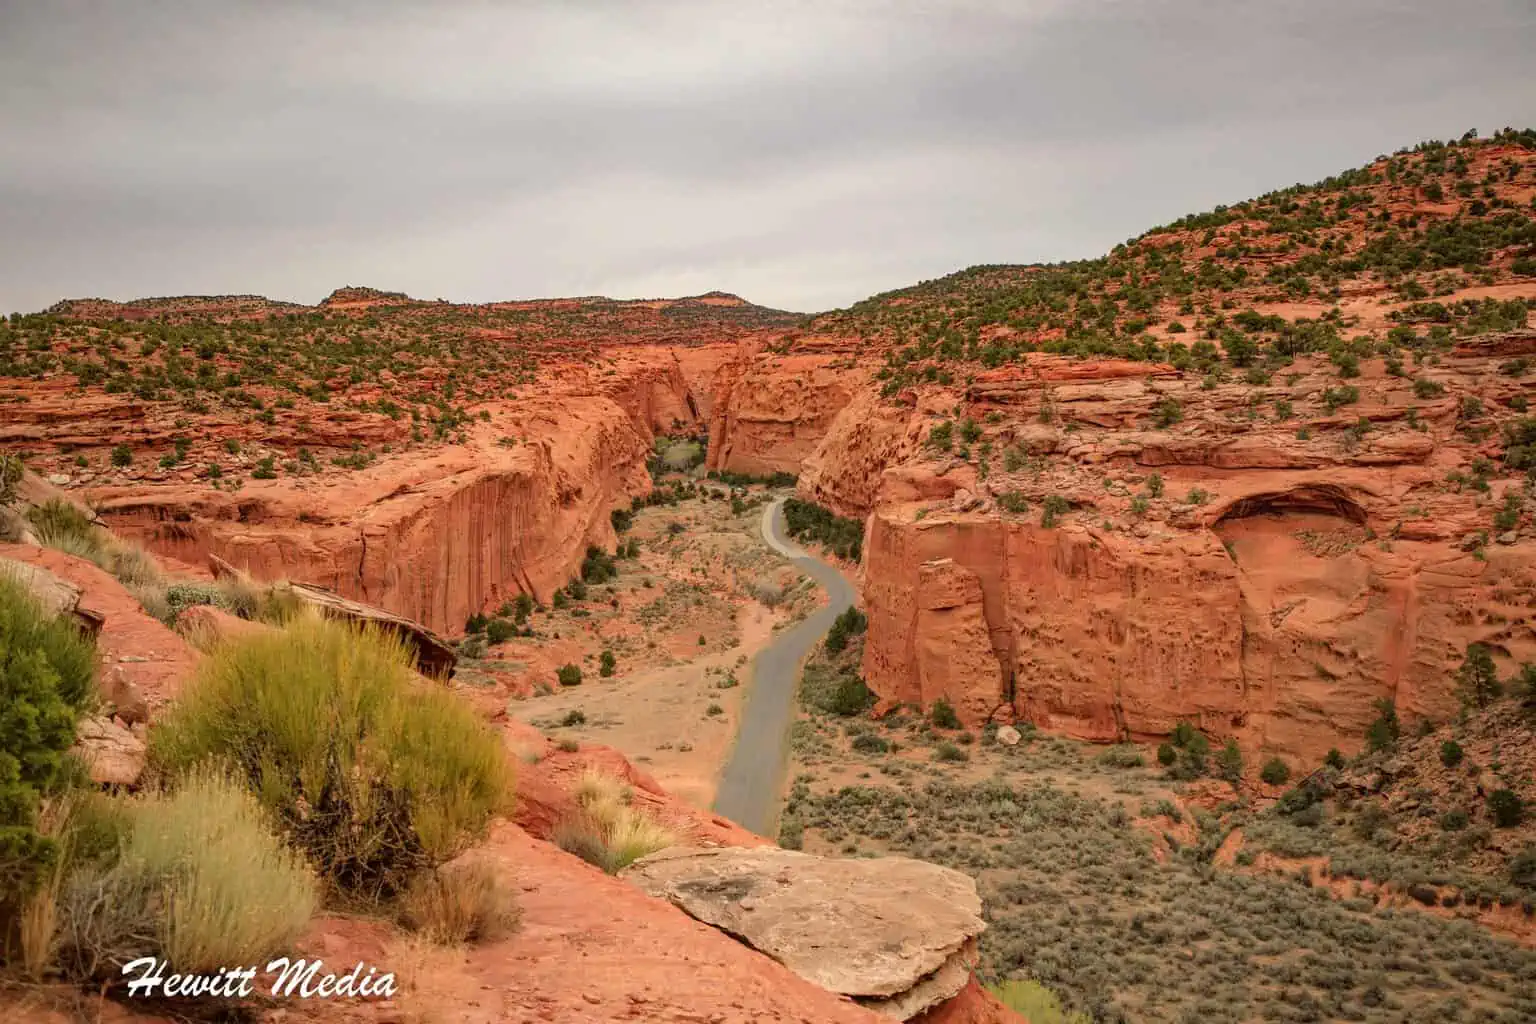 Southwest United States Travel Itinerary - Grand Staircase-Escalante National Monument